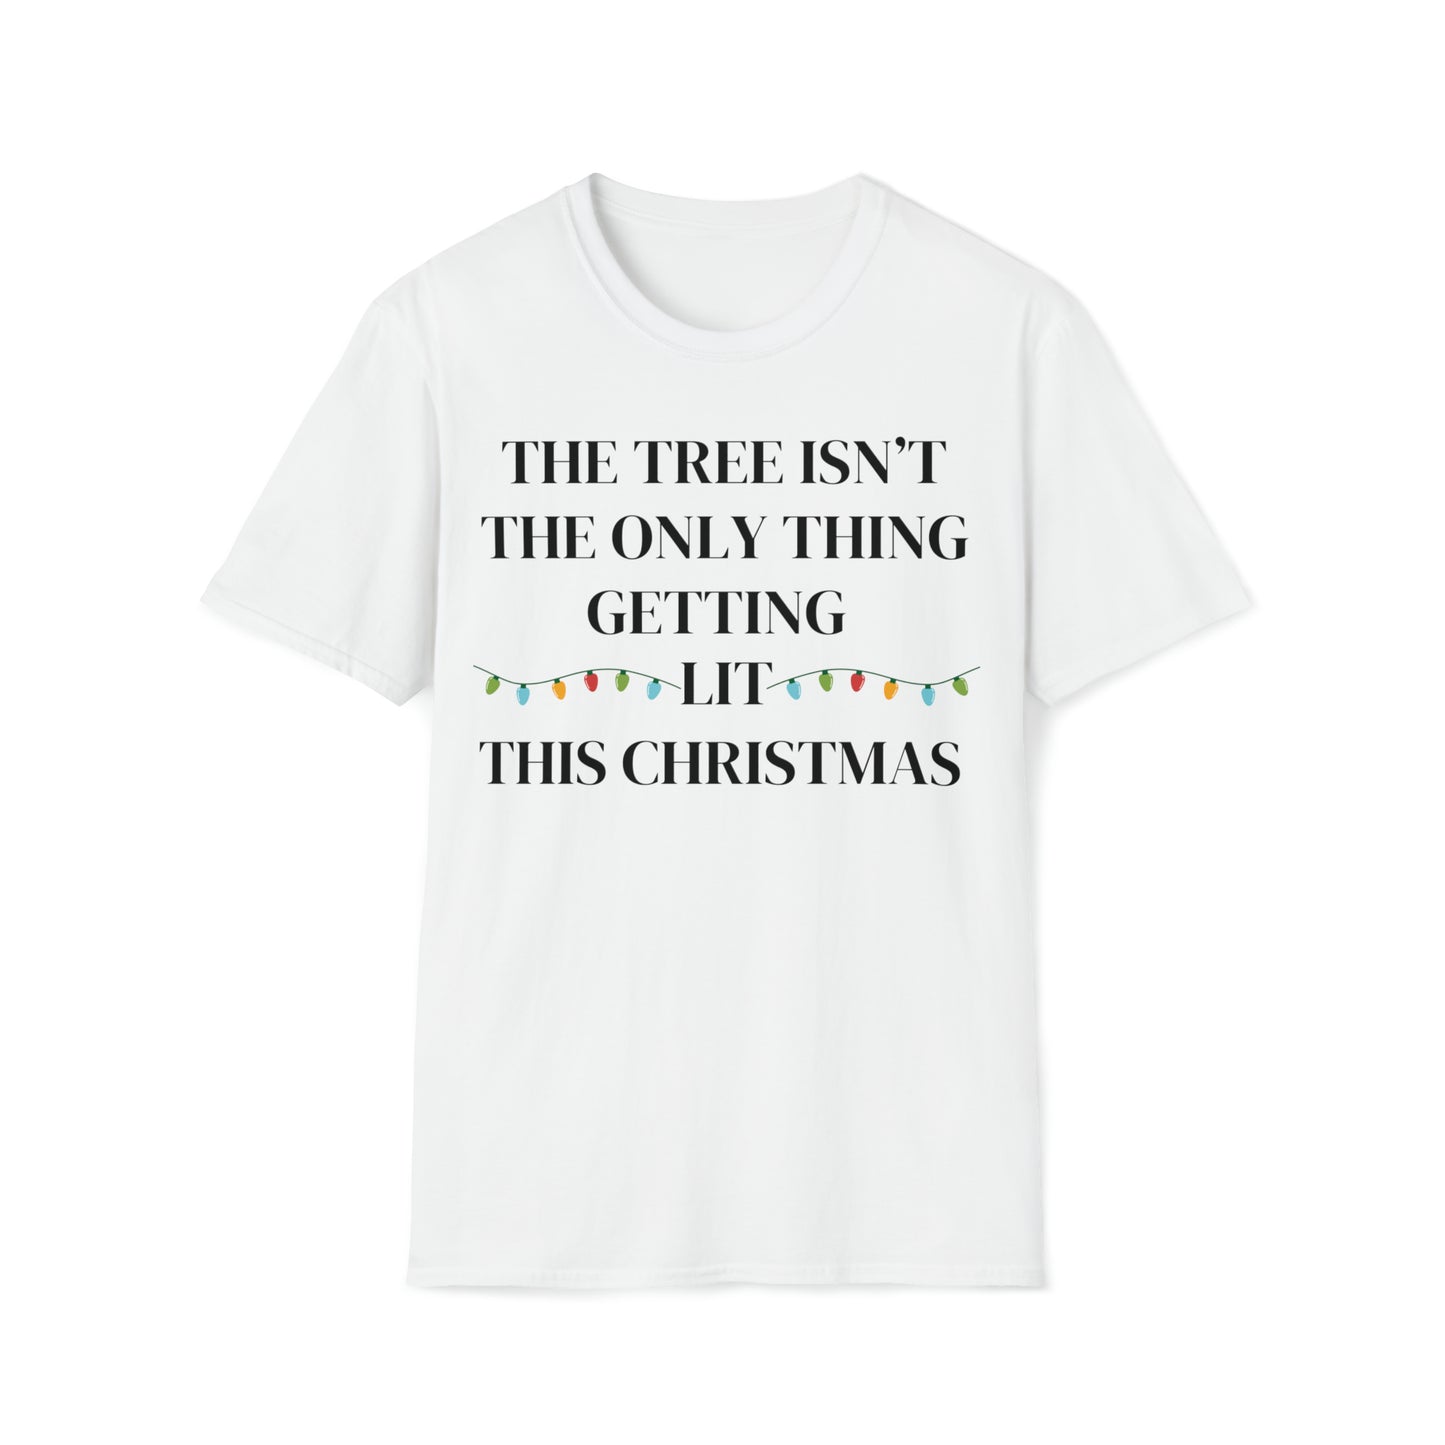 Christmas T-Shirt - The Tree Isn't The Only Thing Getting Lit This Christmas!